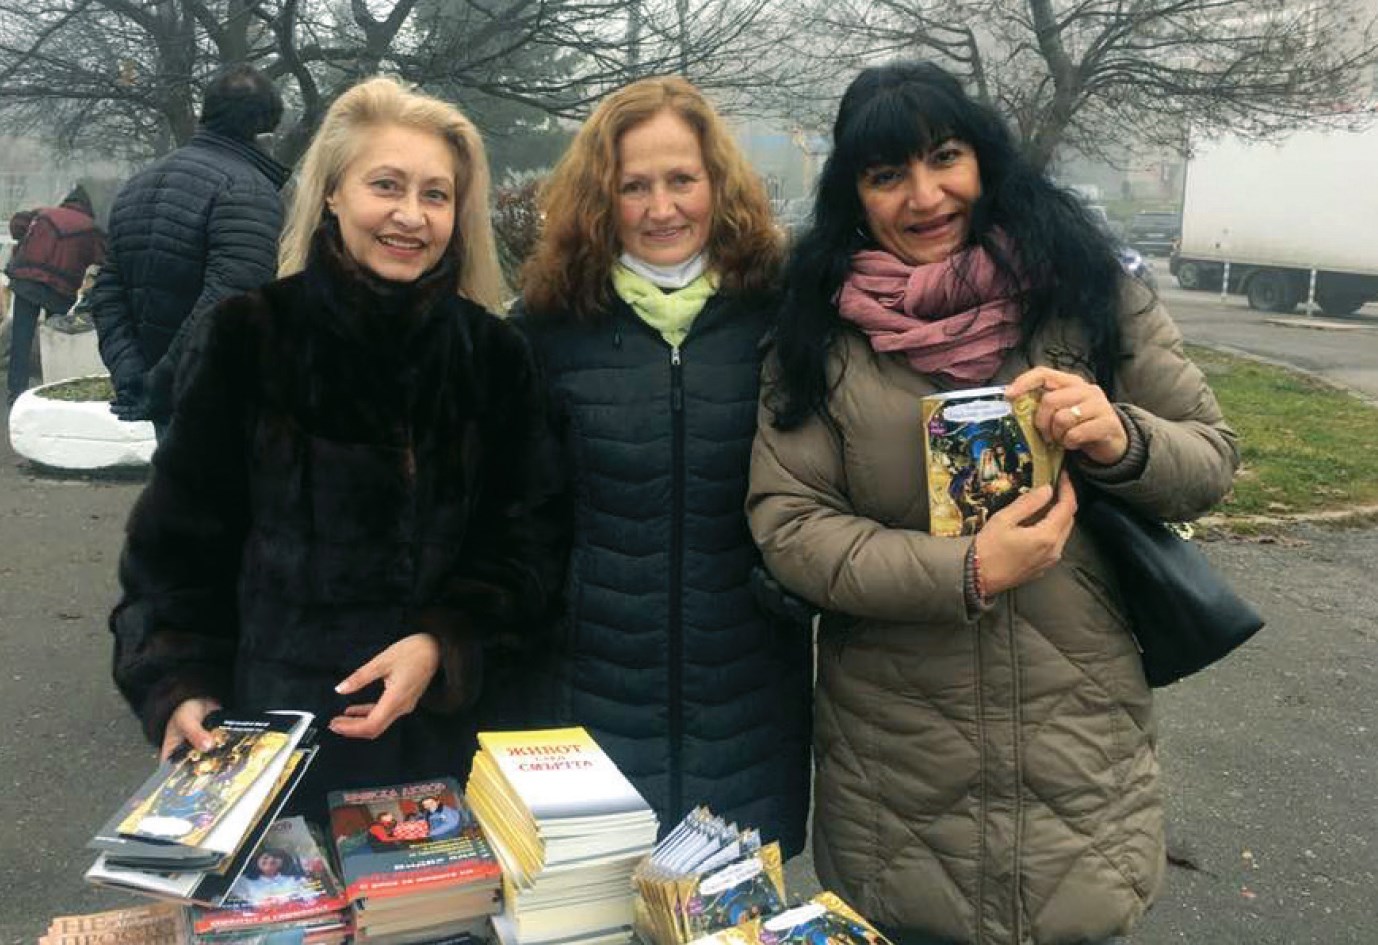 Christians Across Europe Urgently Ask for Scripture Booklets for Ukraine Refugees. World Missionary Press Answers the Call